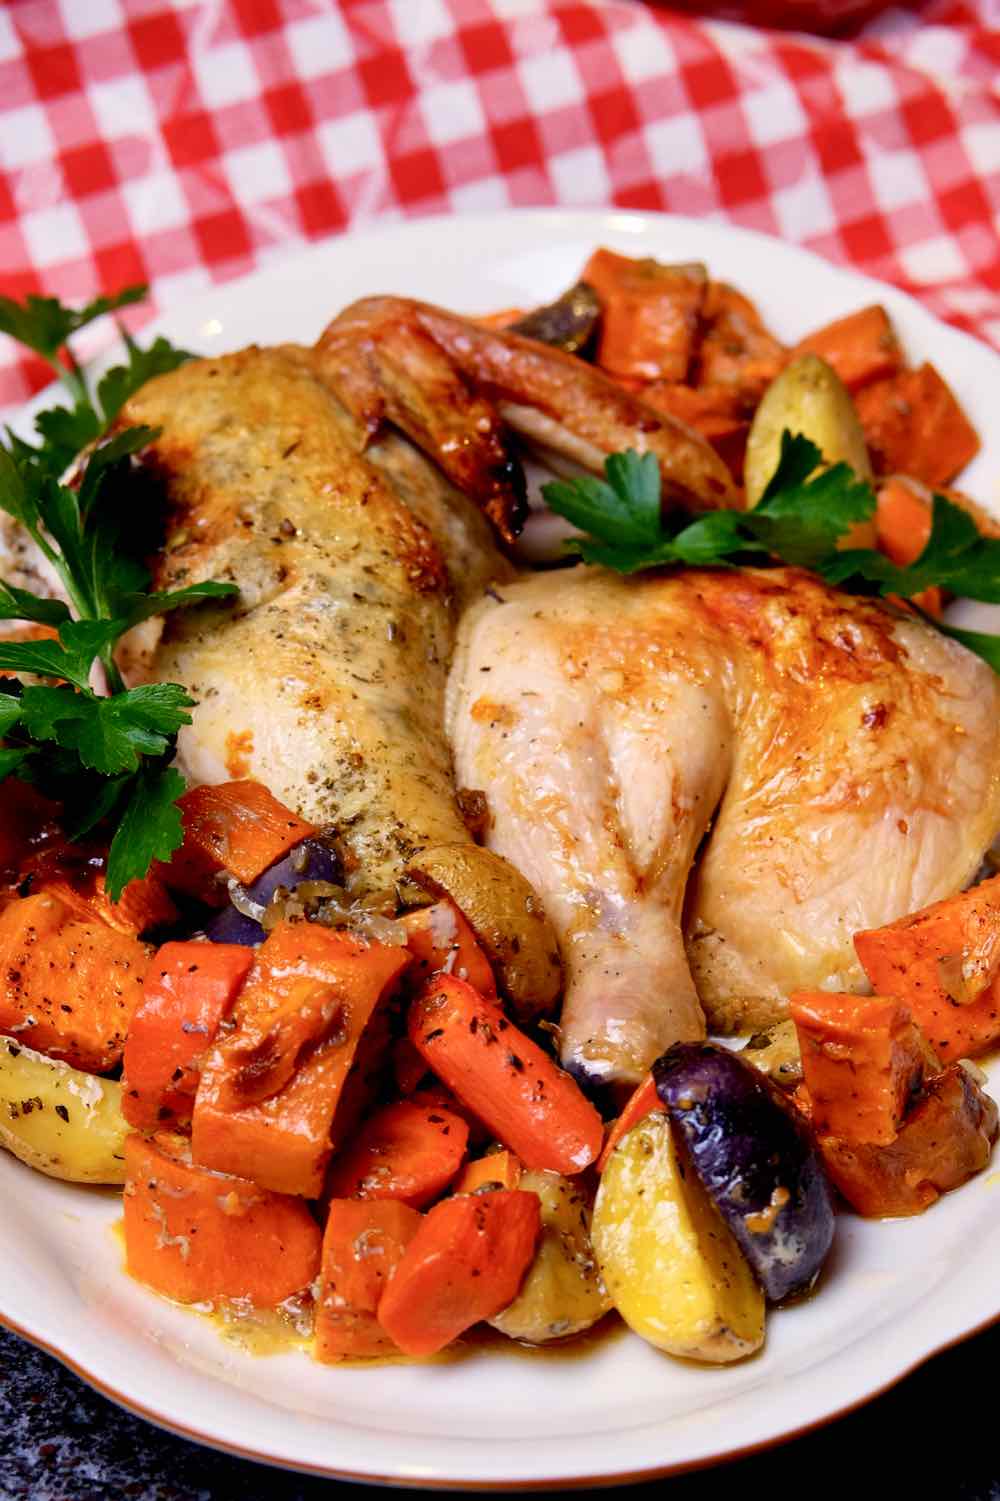 Lemon-Herb Roasted Chicken with Roasted Sweet Potatoes on platter